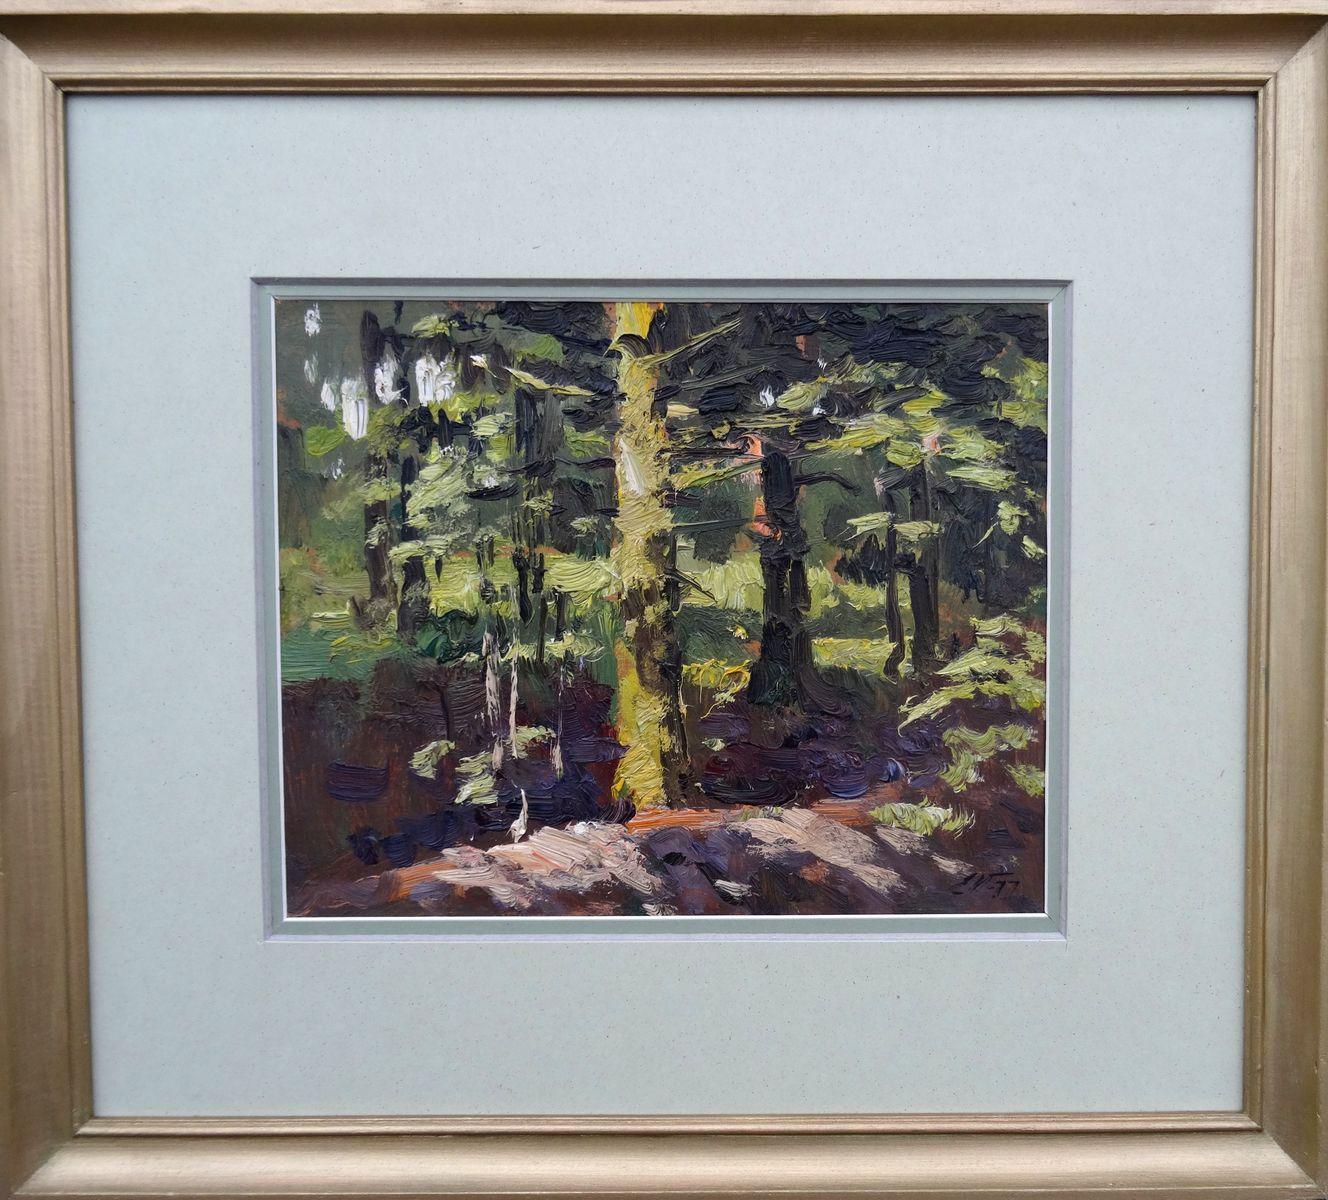 Sunny day in the forest. 1977, cardboard, oil, 21.5x26 cm - Art by Edgars Vinters